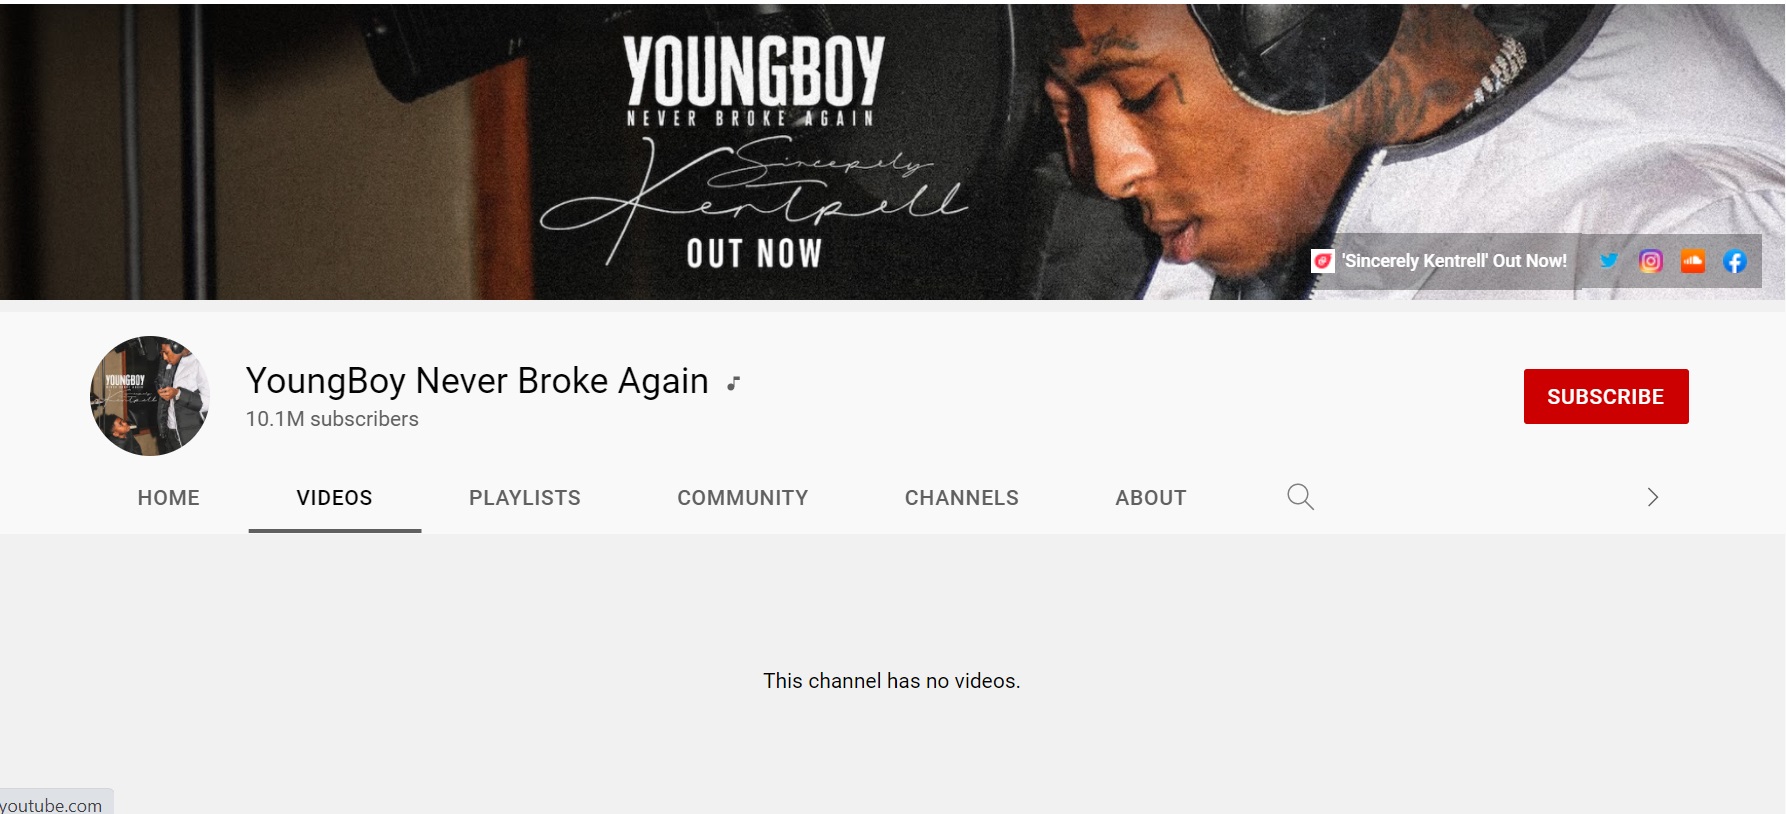 NBA Youngboy has had all content removed from his YouTube channel